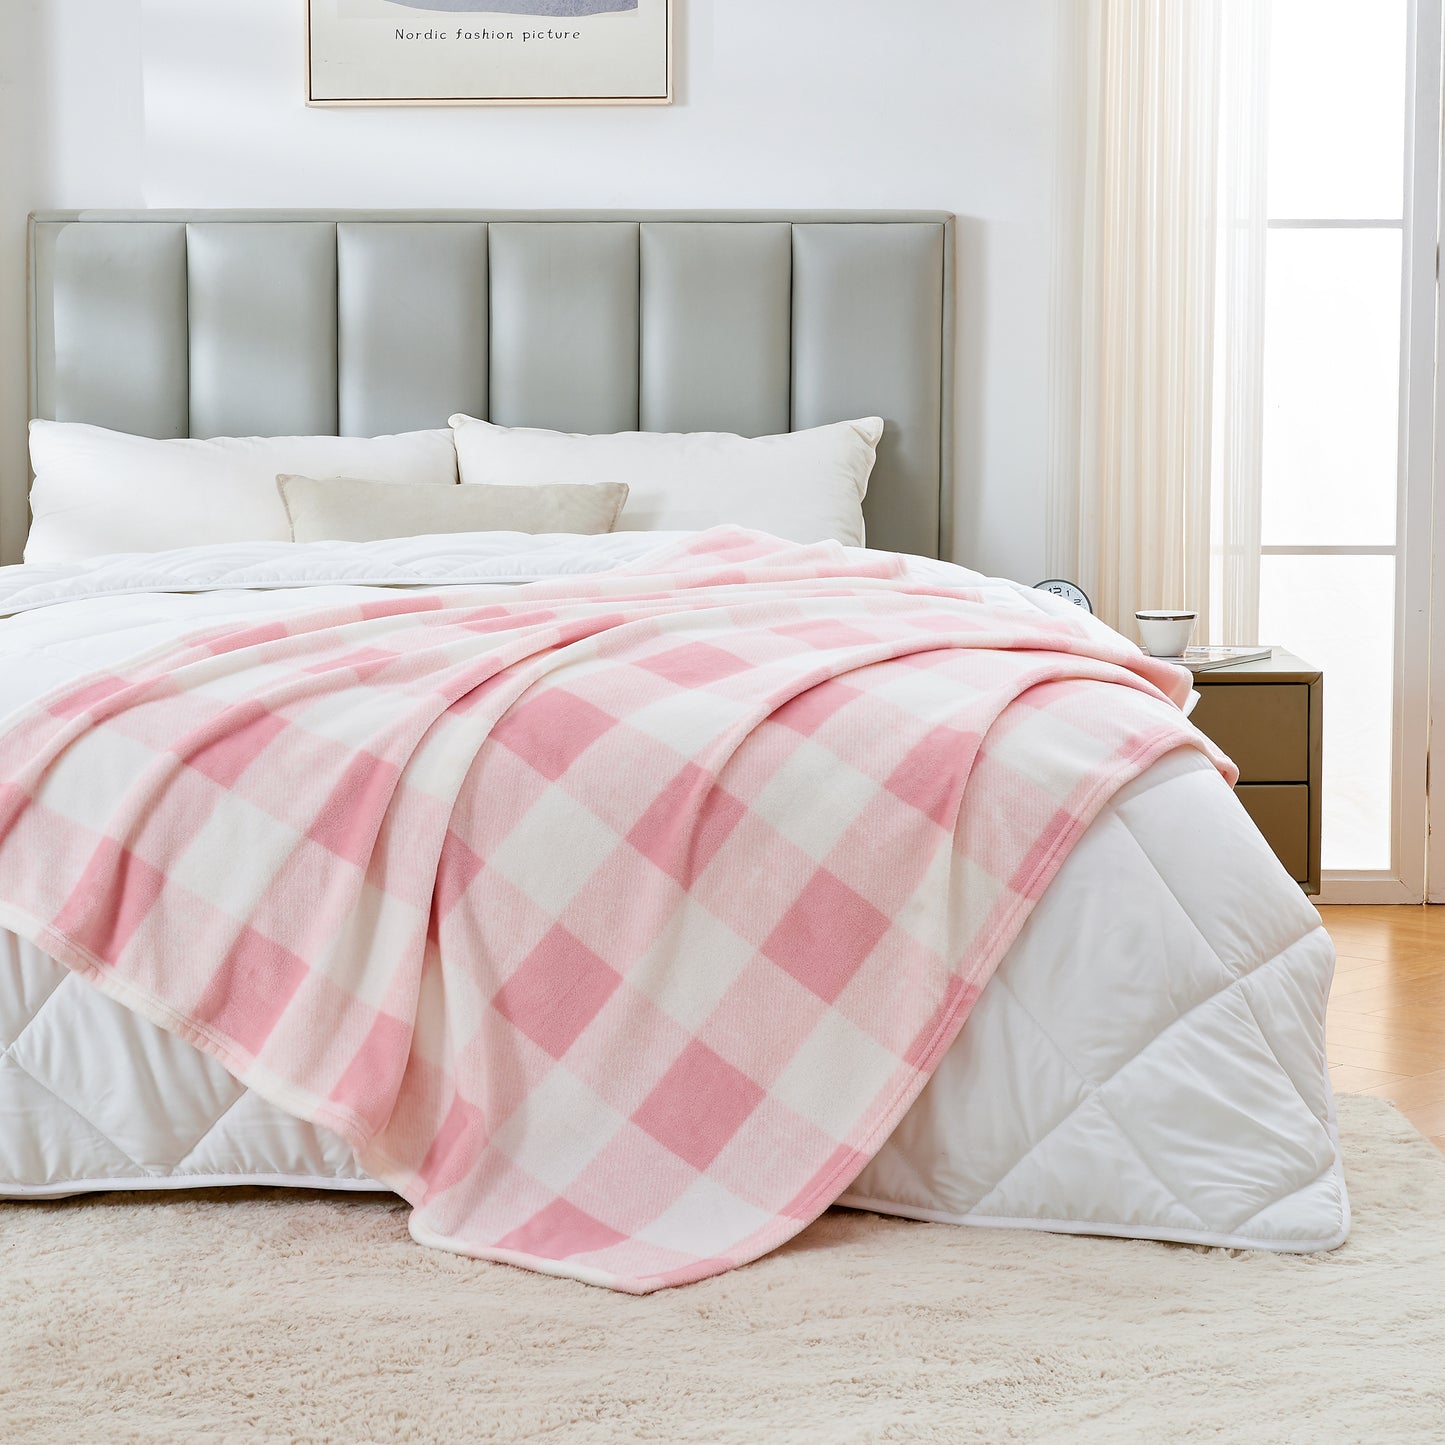 Classic Checkered Flannel Blanket